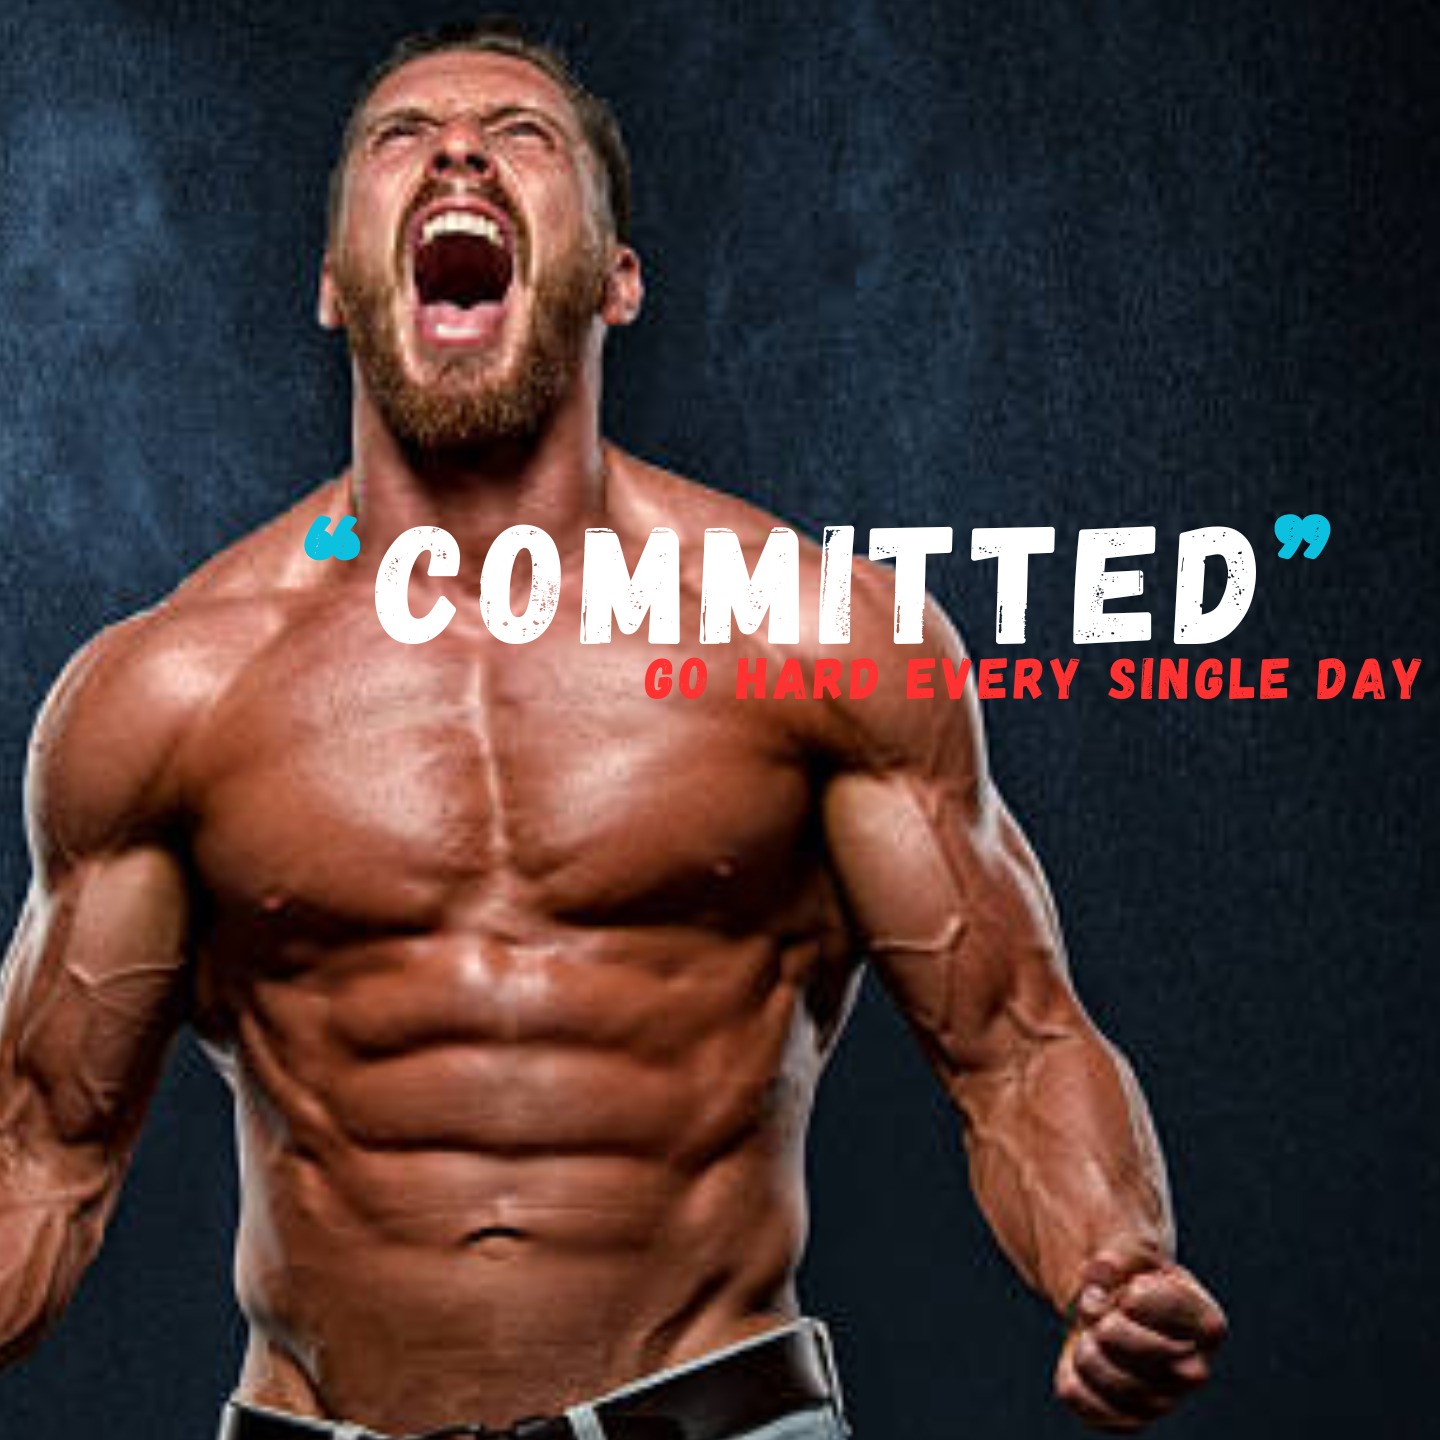 COMMITTED - The Most Powerful Motivational Speech Compilation for Success, Running & Working Out